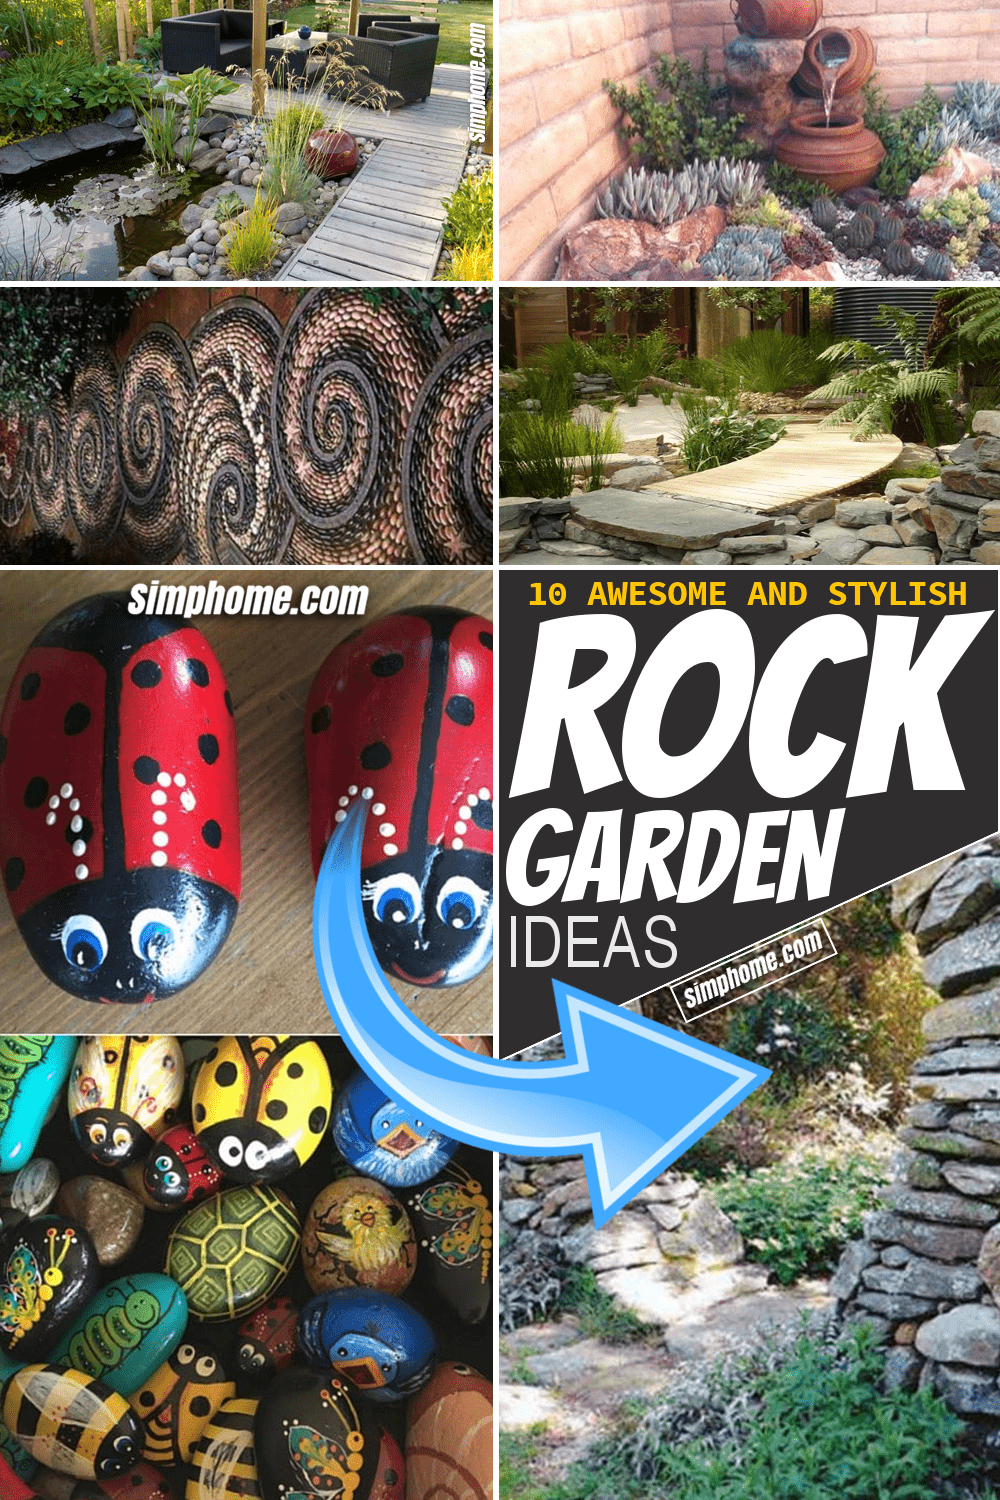 Simphome.com 10 Awesome and Stylish Rock Garden Ideas Pinterest Featured Image